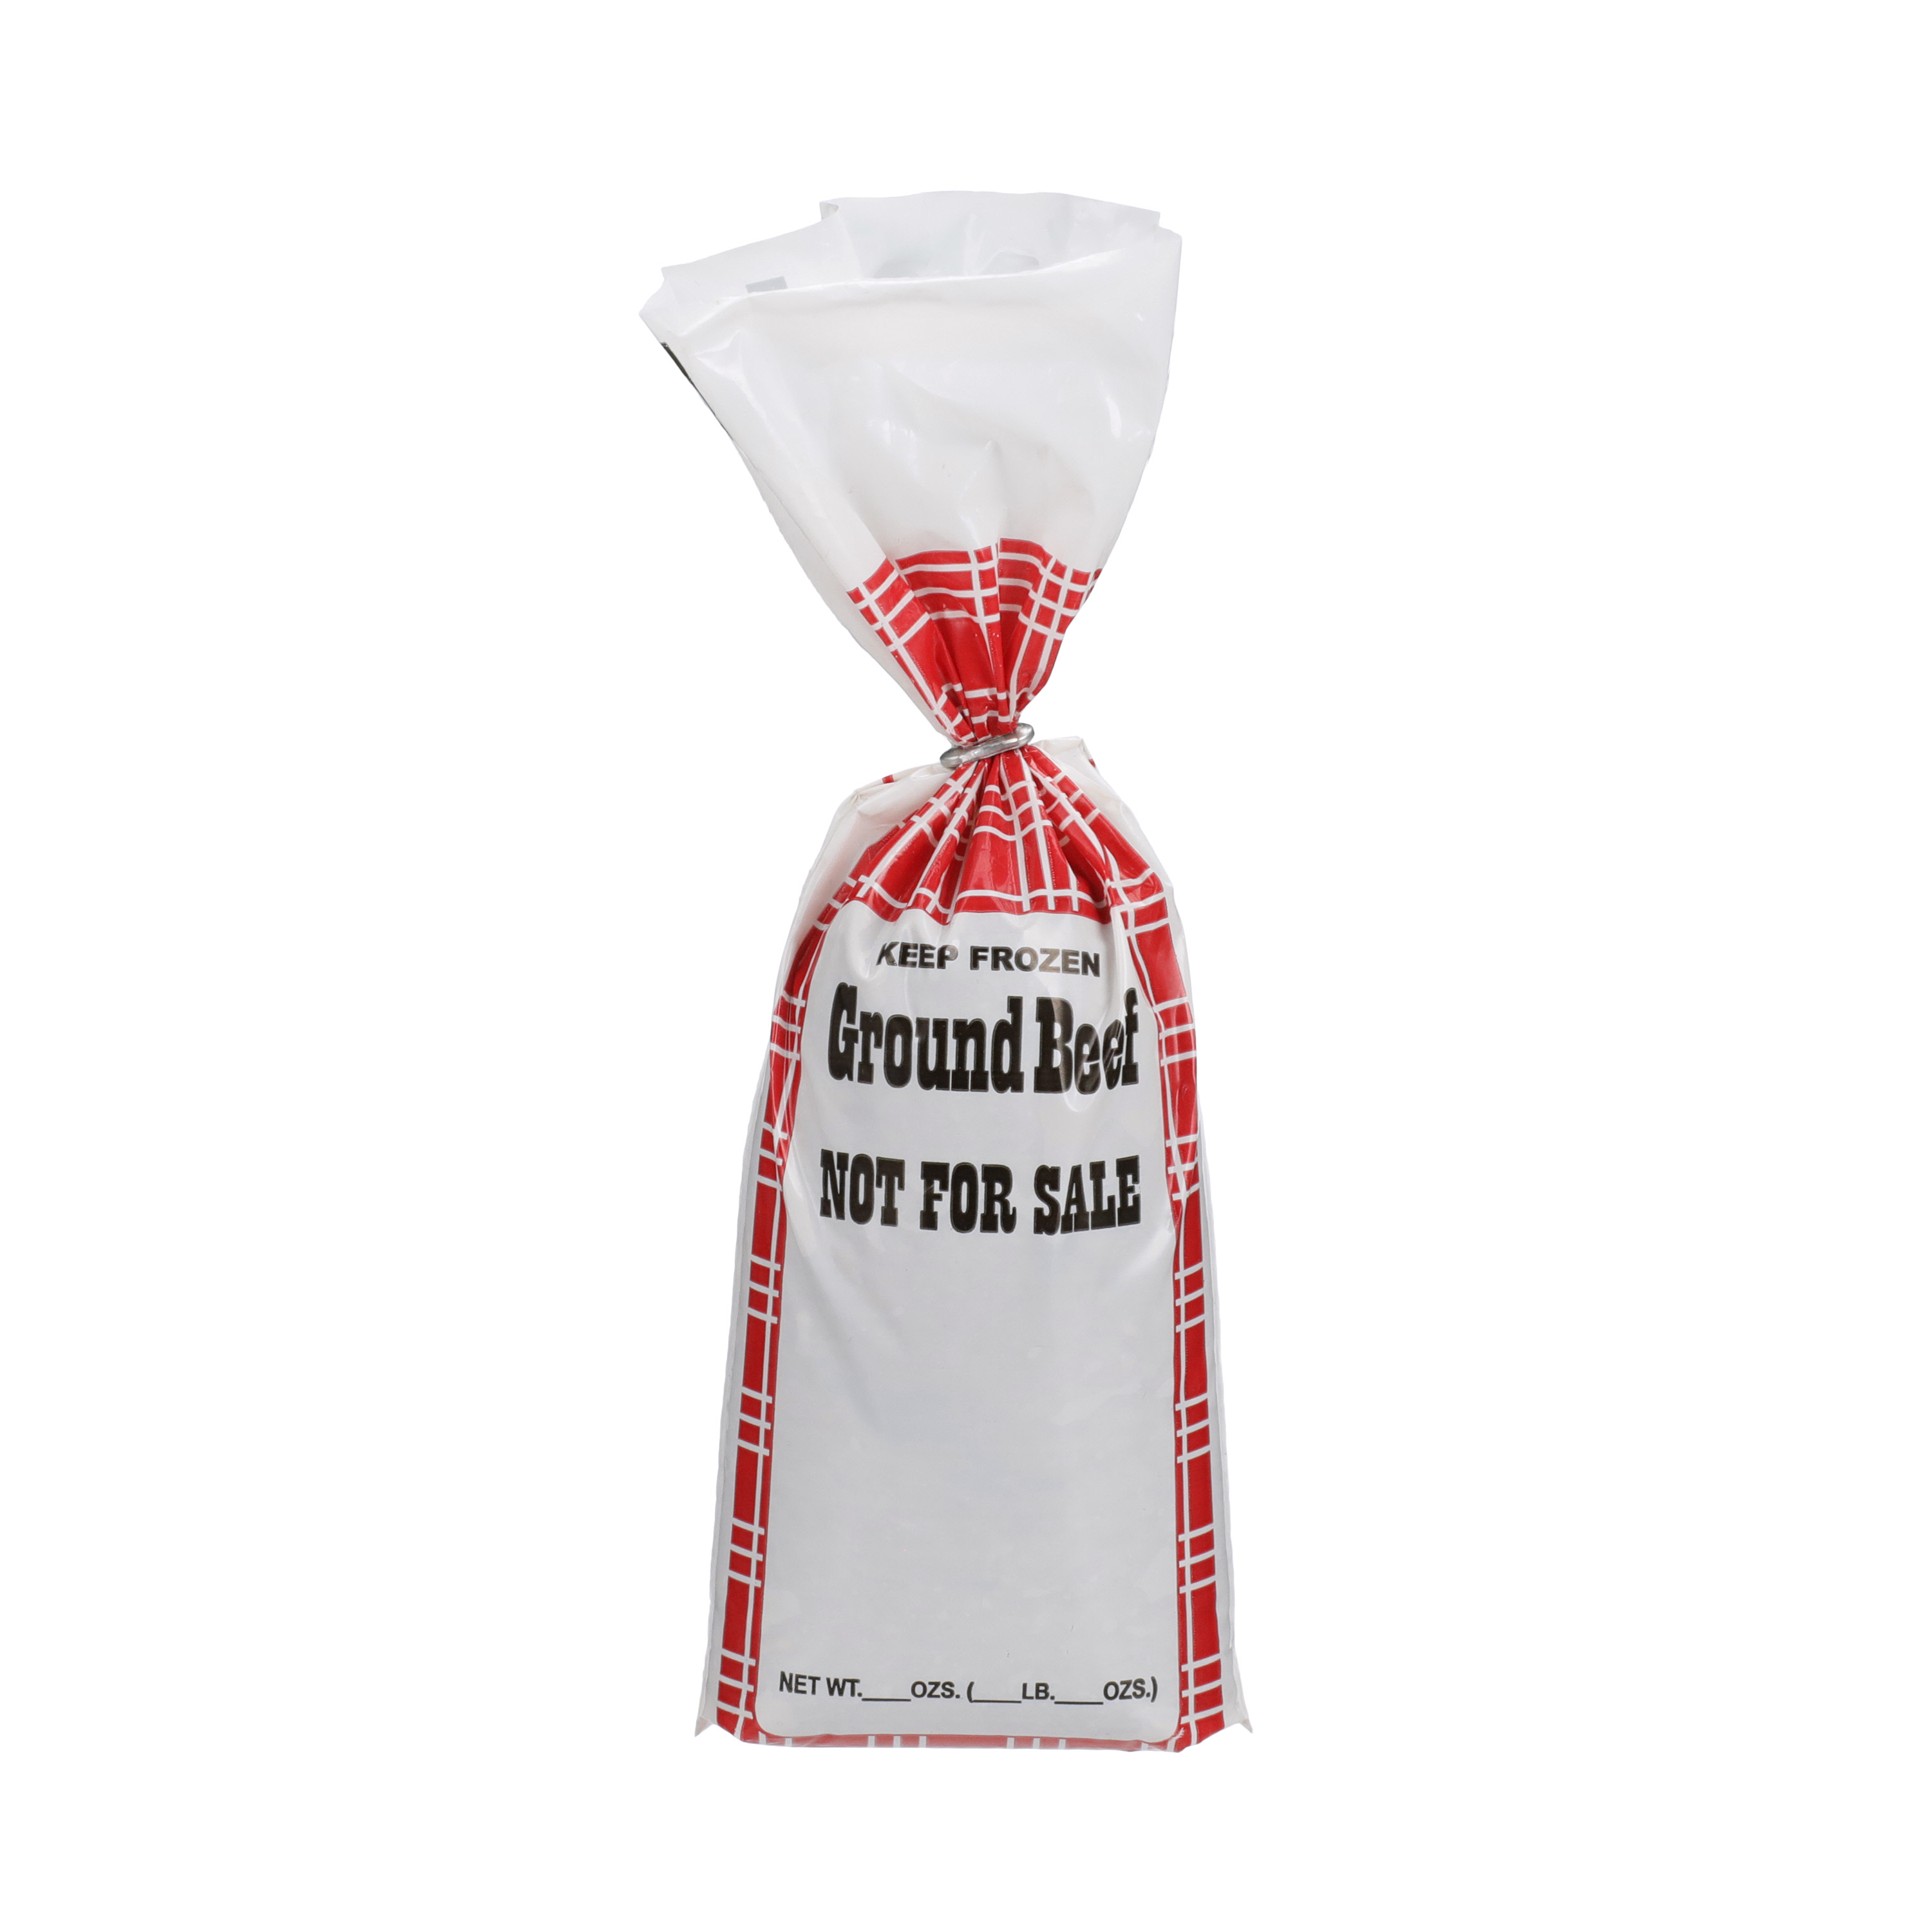 One, two, or five pound ground beef meat chub bags marked not for